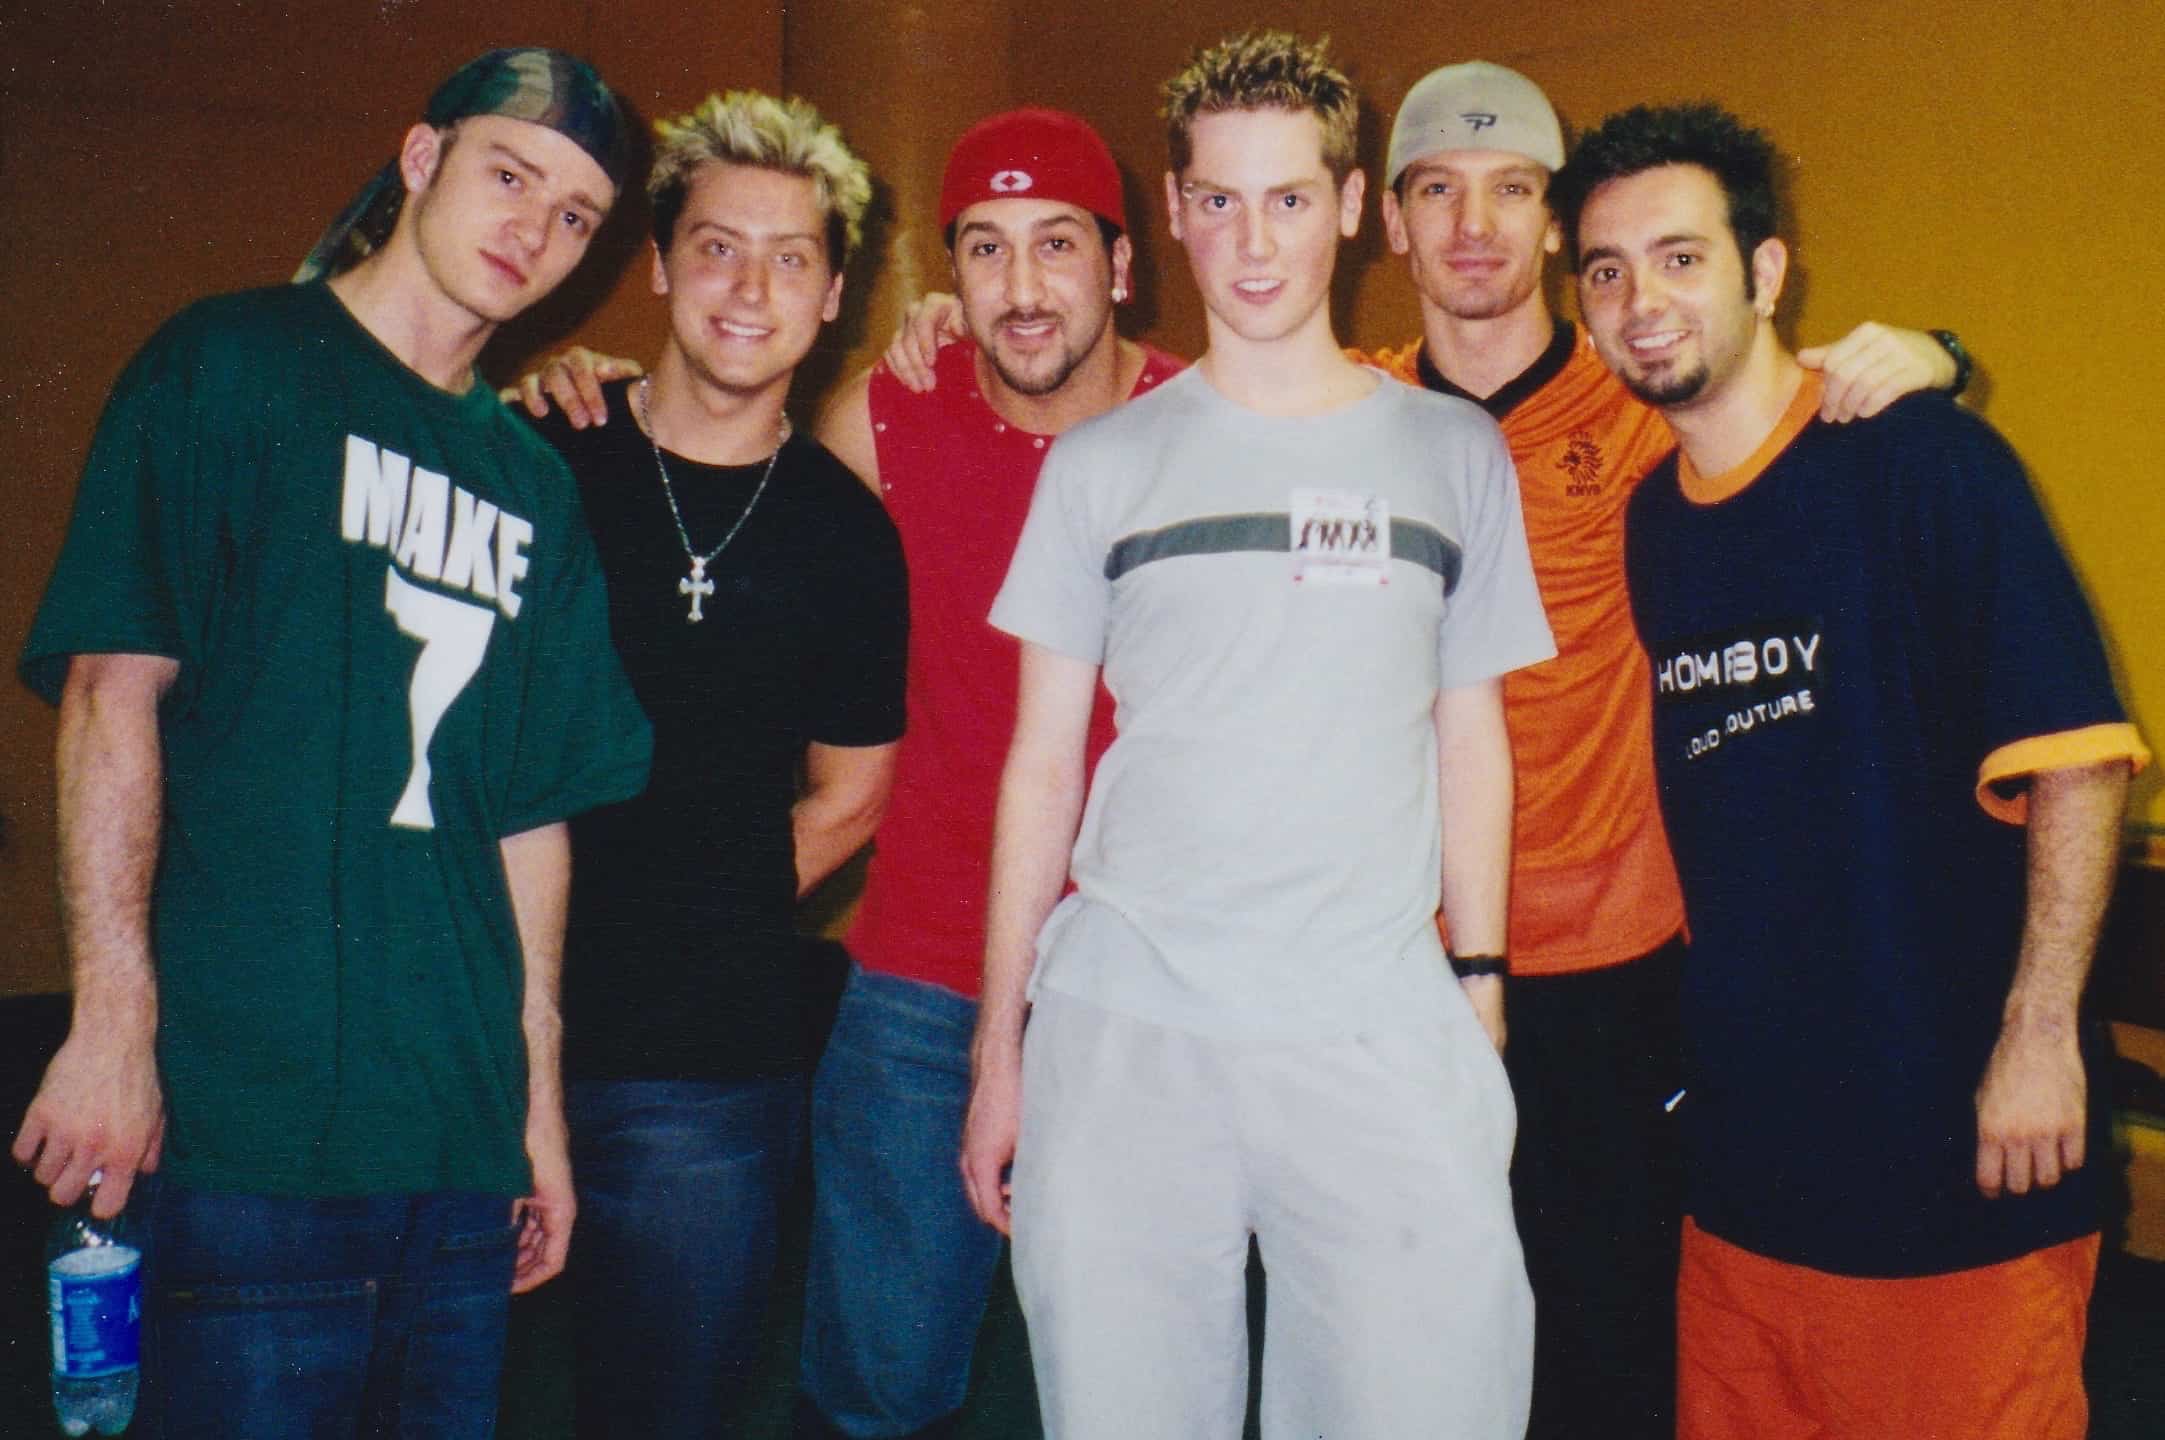 NSYNC in the US on tour